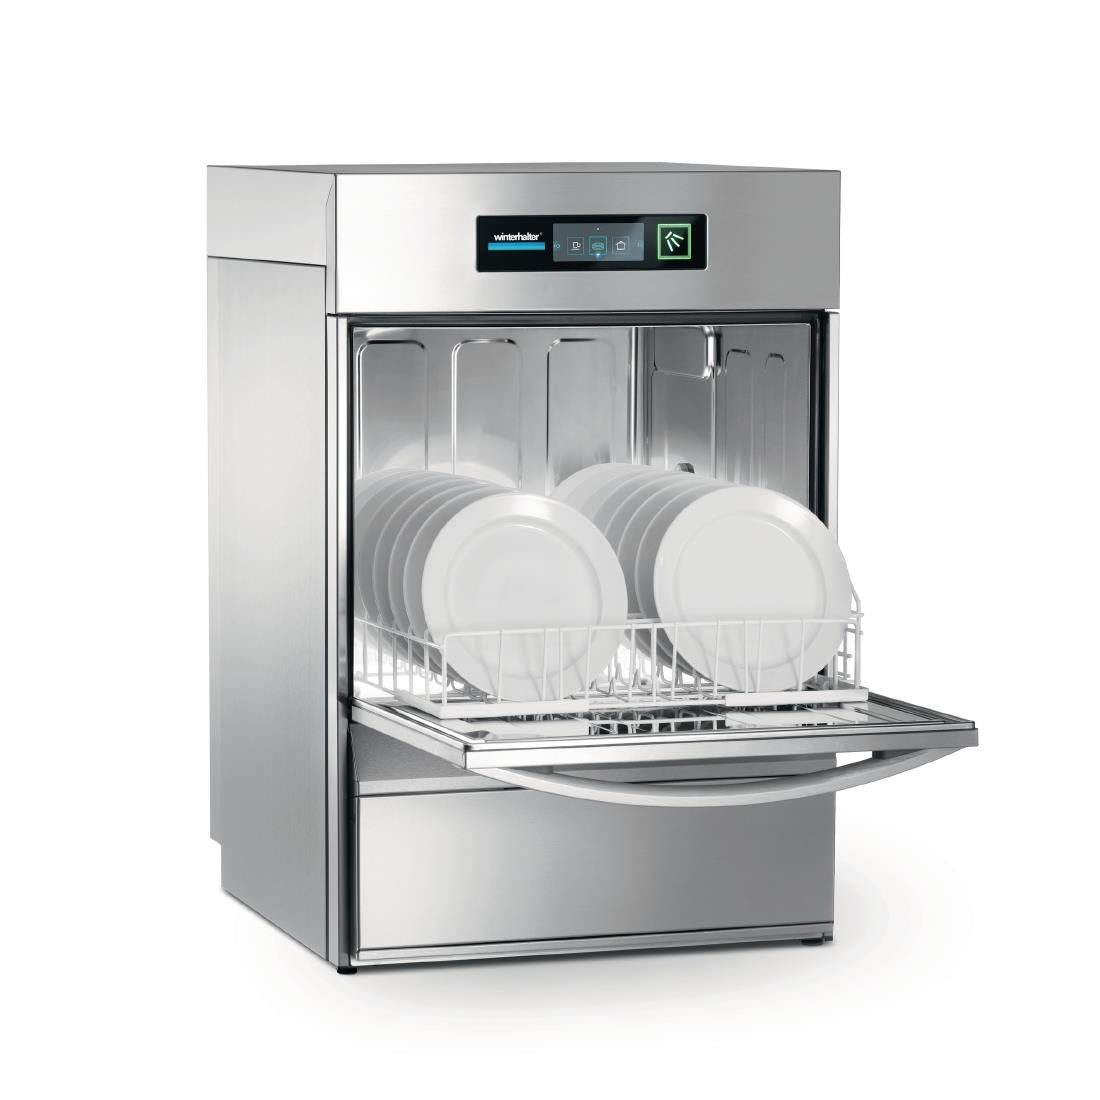 Winterhalter Undercounter Dishwasher UC-L-E Energy with Install